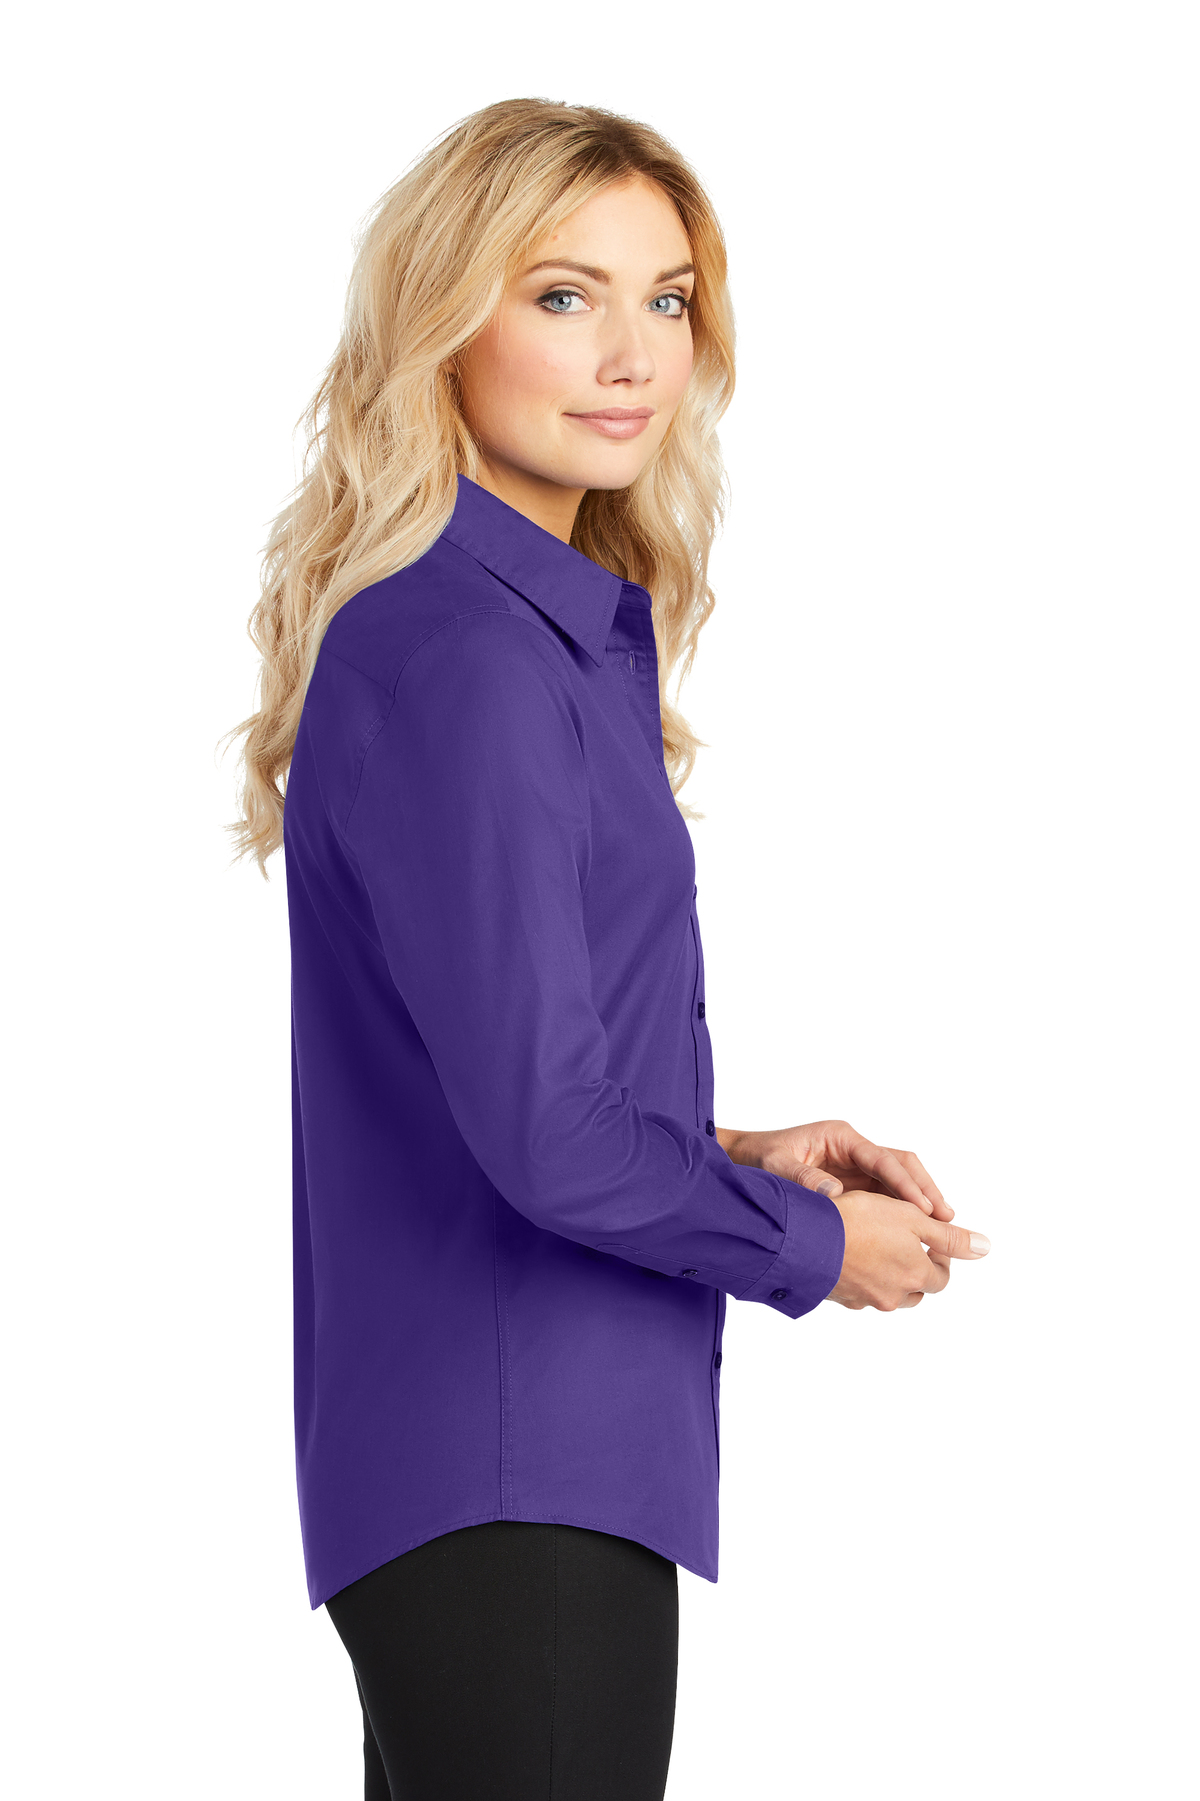 Port Authority Ladies Long Sleeve Easy Care Shirt | Product | Port